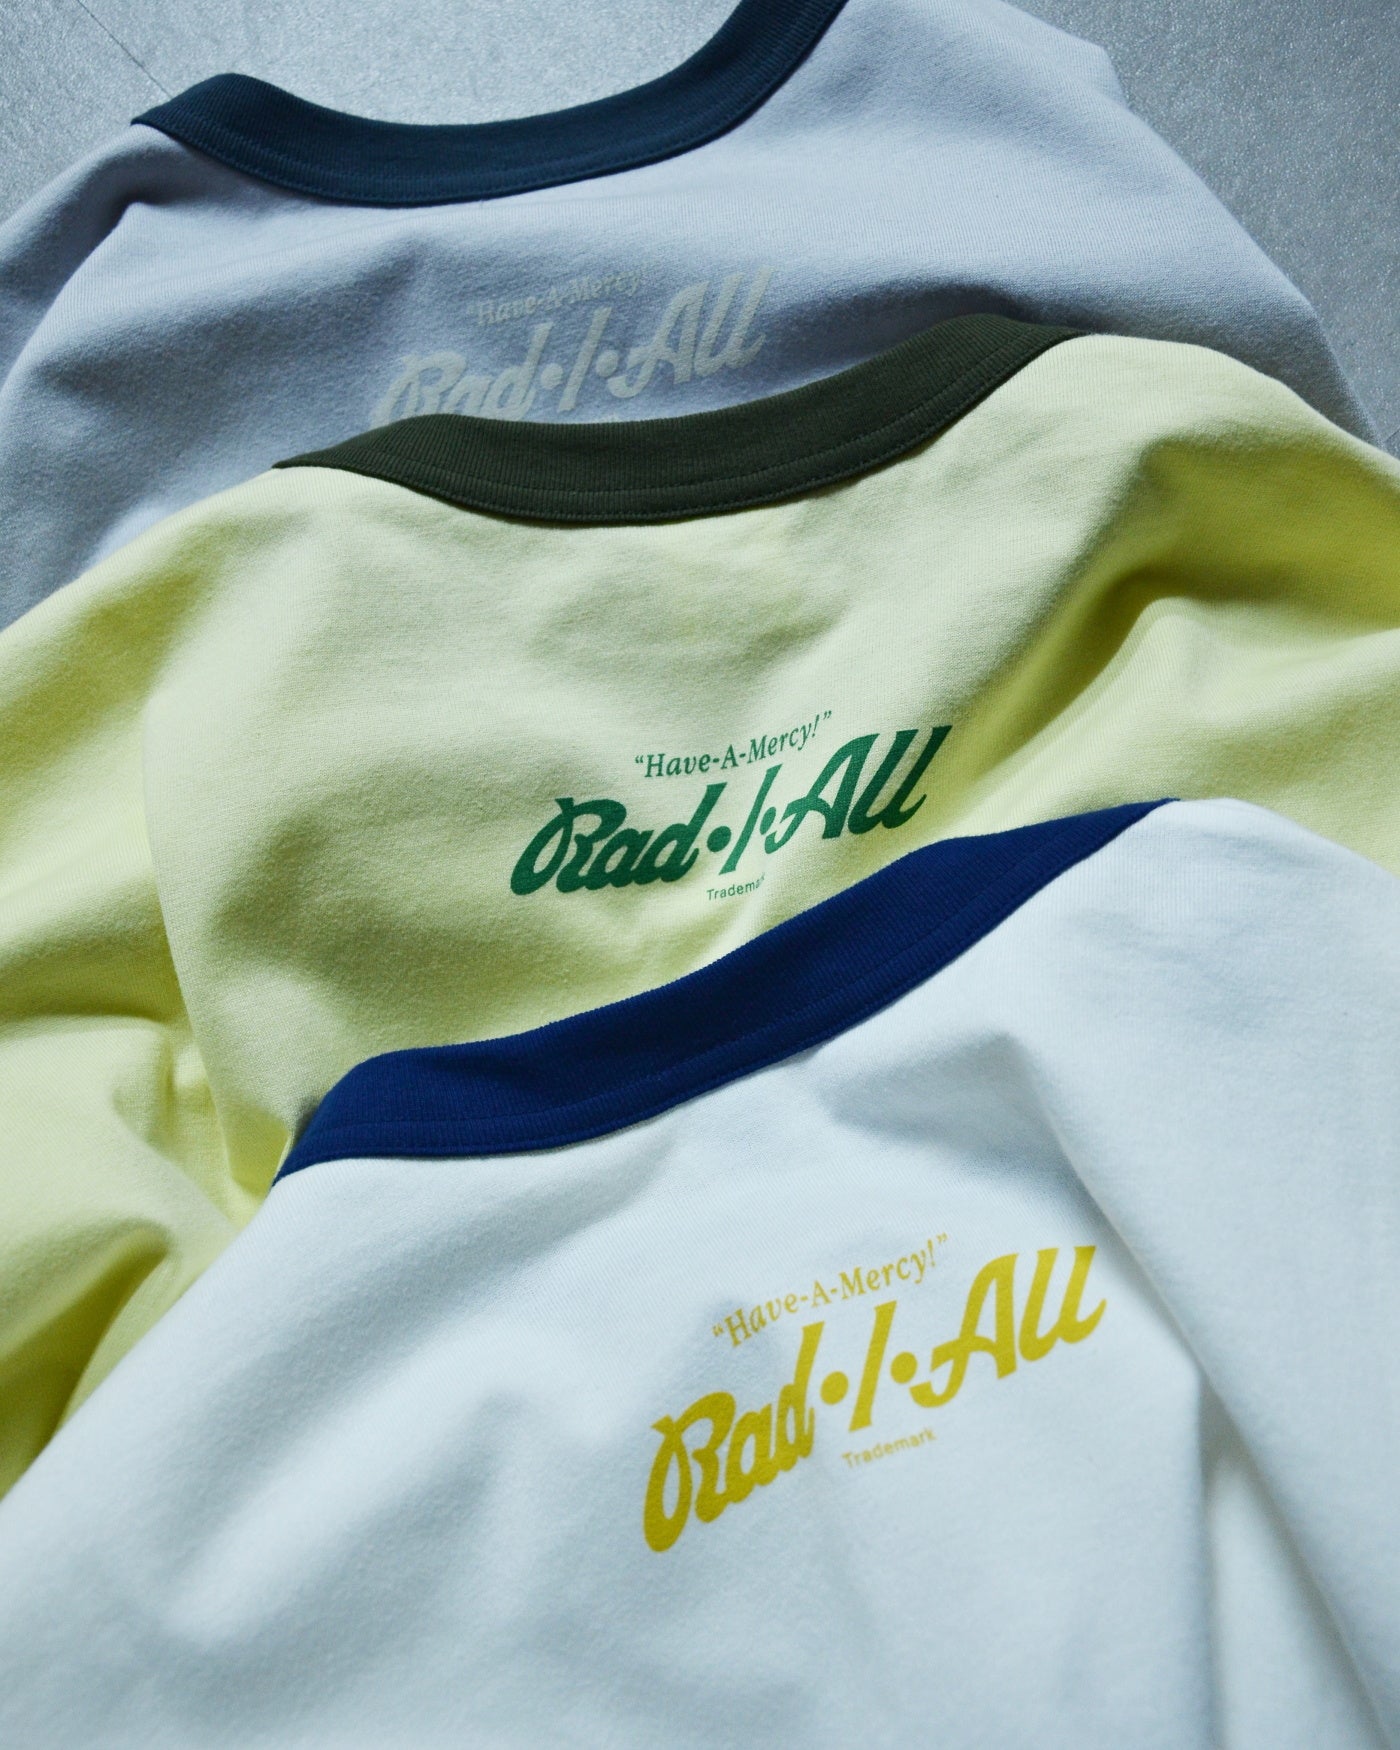 RADIALL | COOKIE - CREW NECK T-SHIRT S/S - White